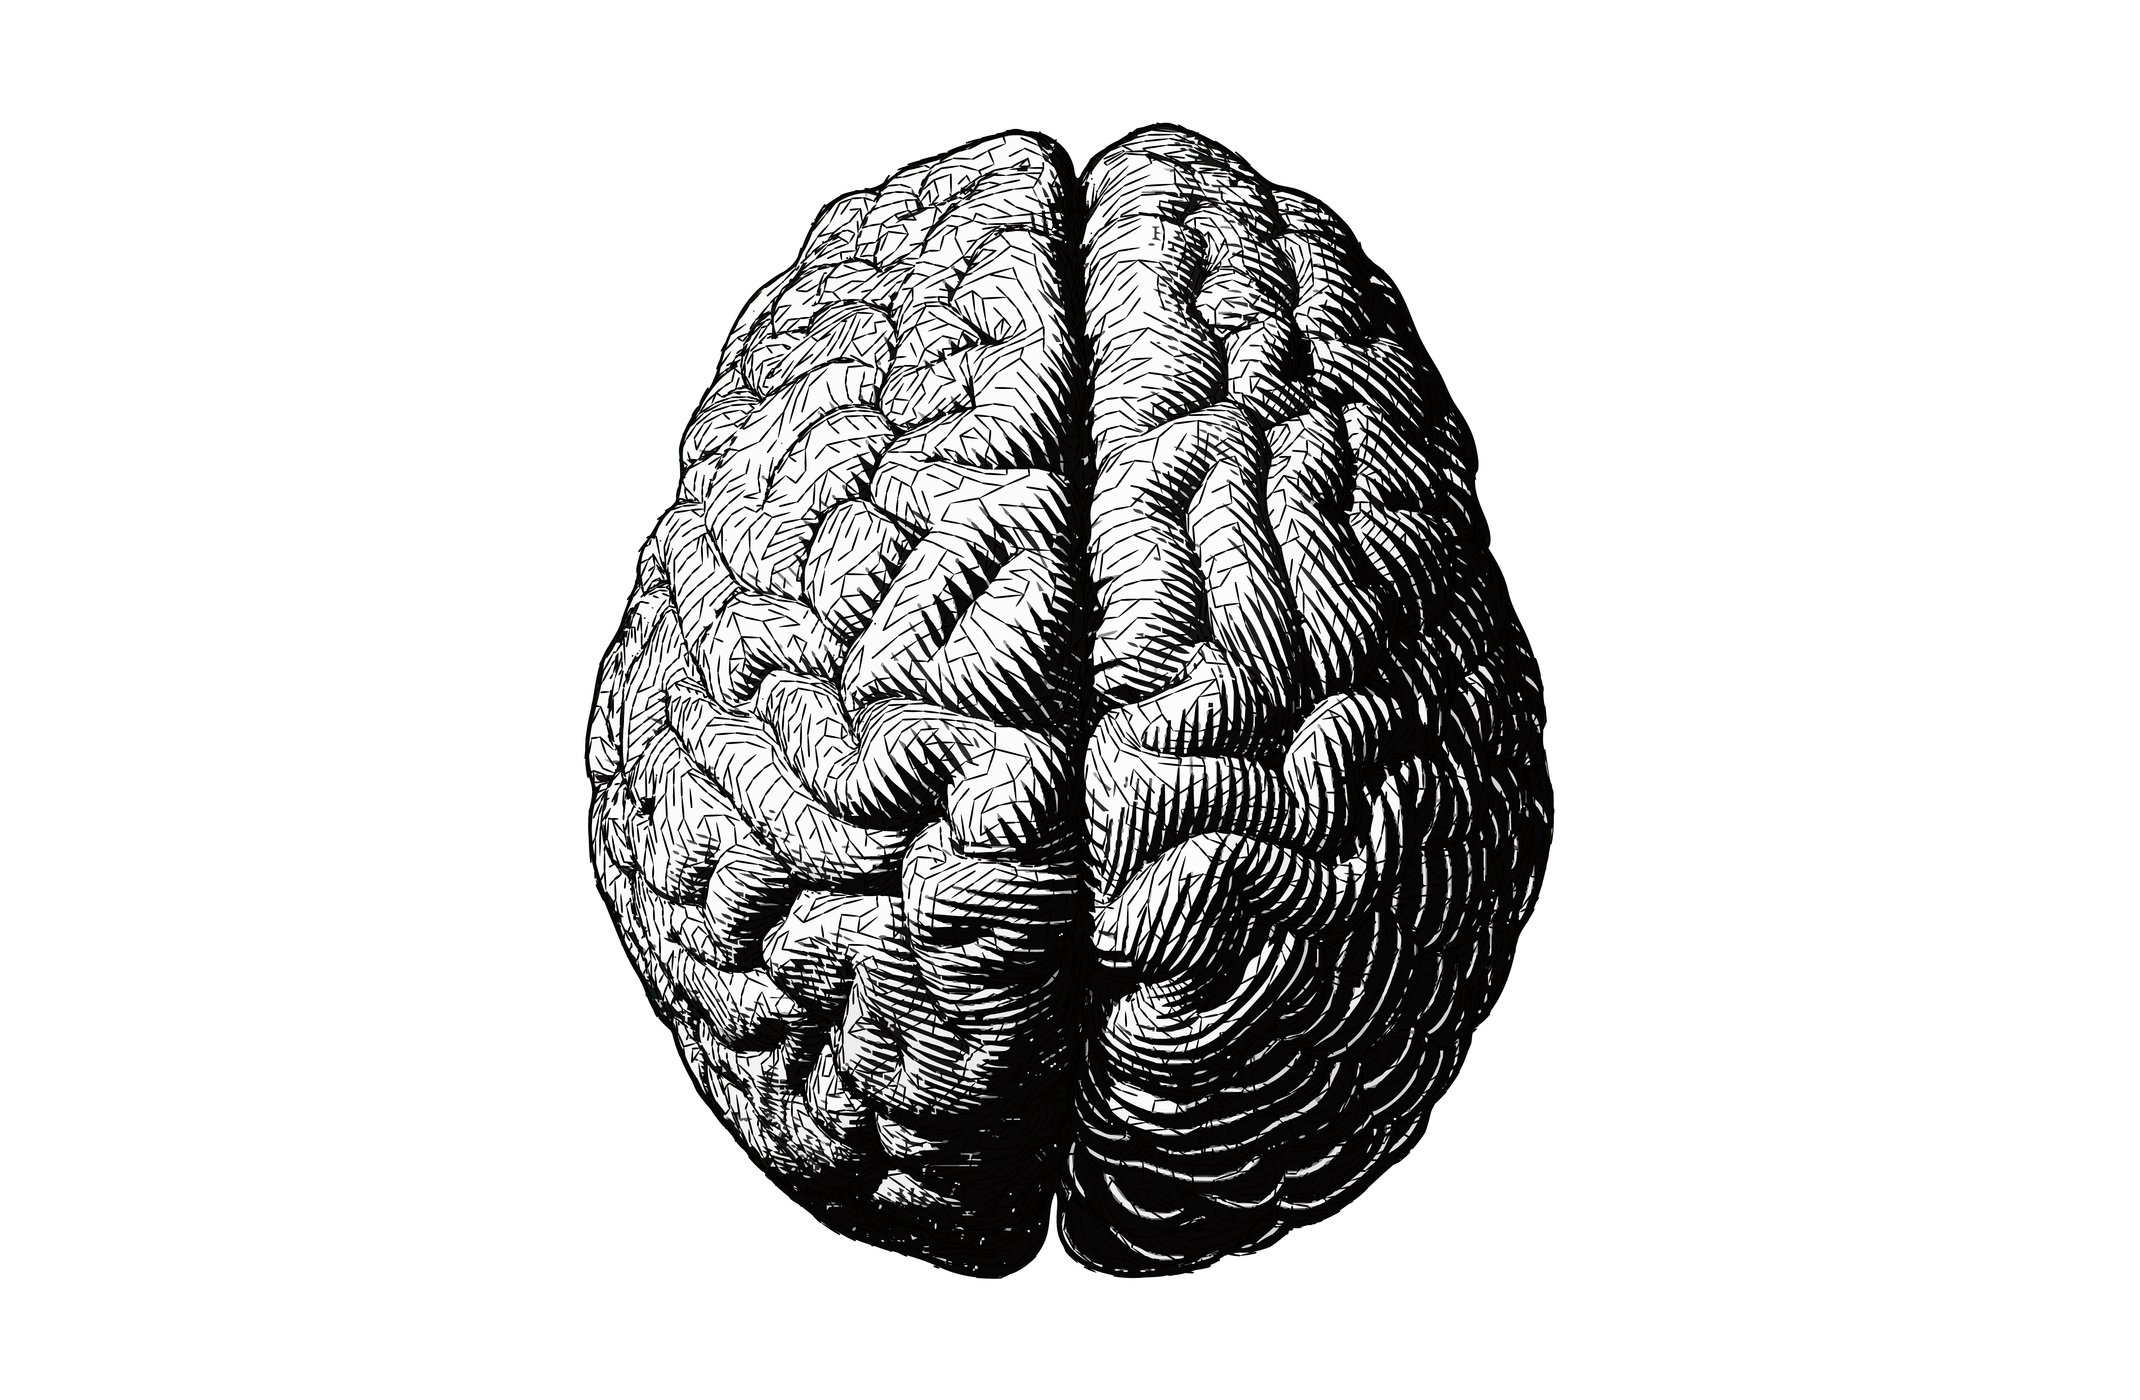 Black and white graphic image of the brain